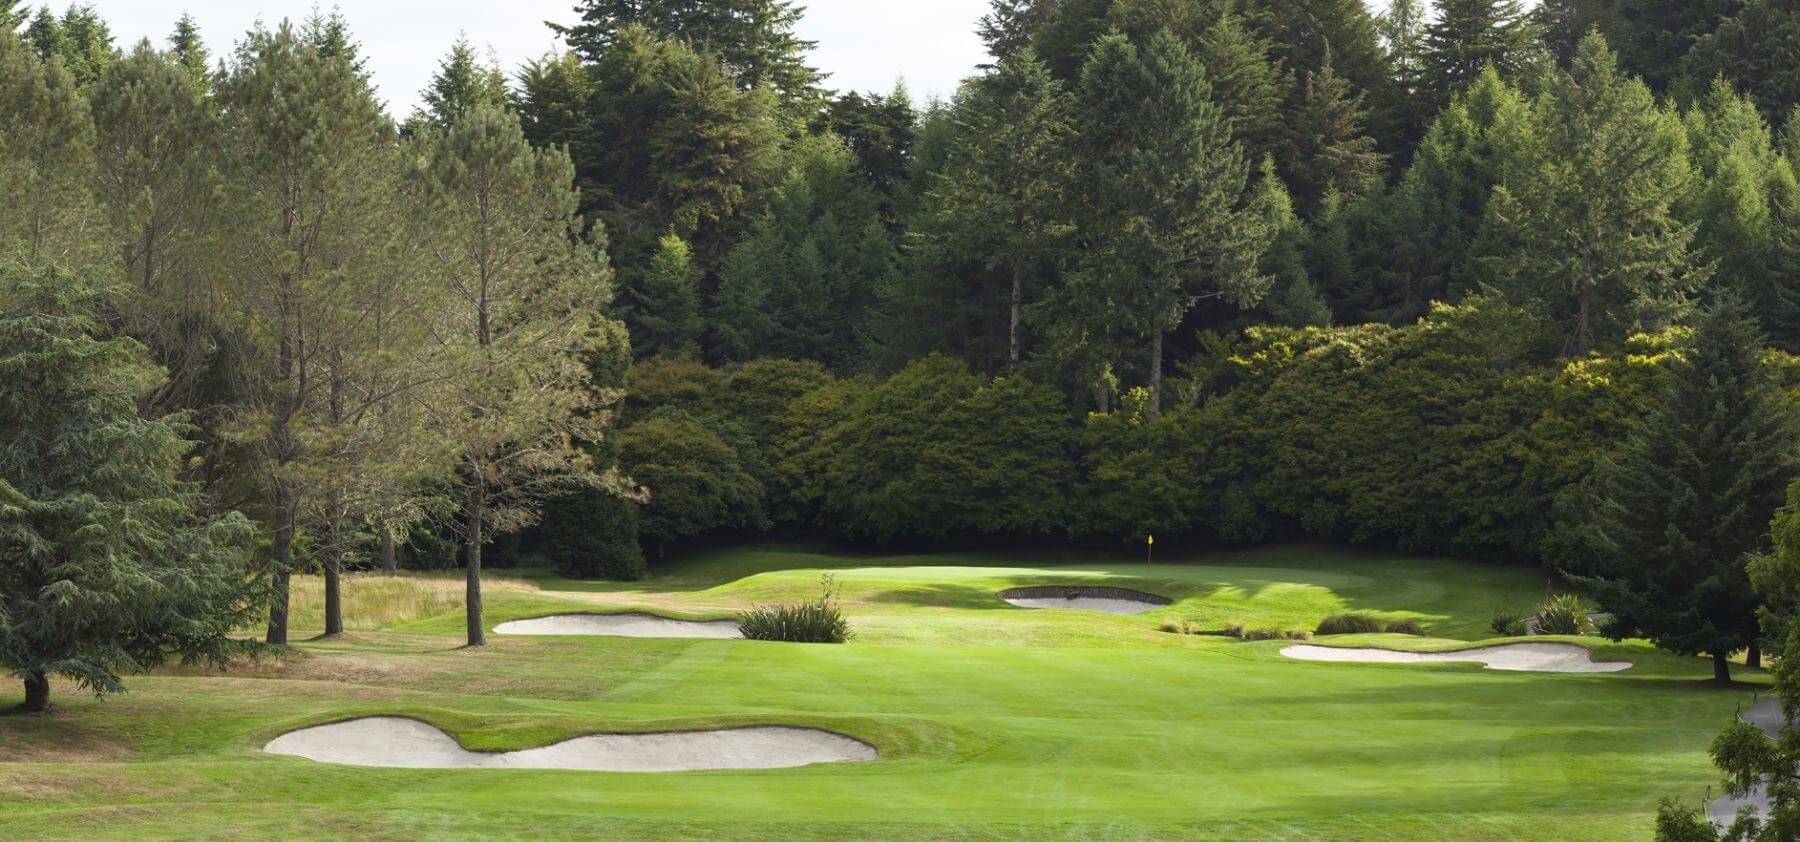 Dense forest surrounds a golf green on three sides